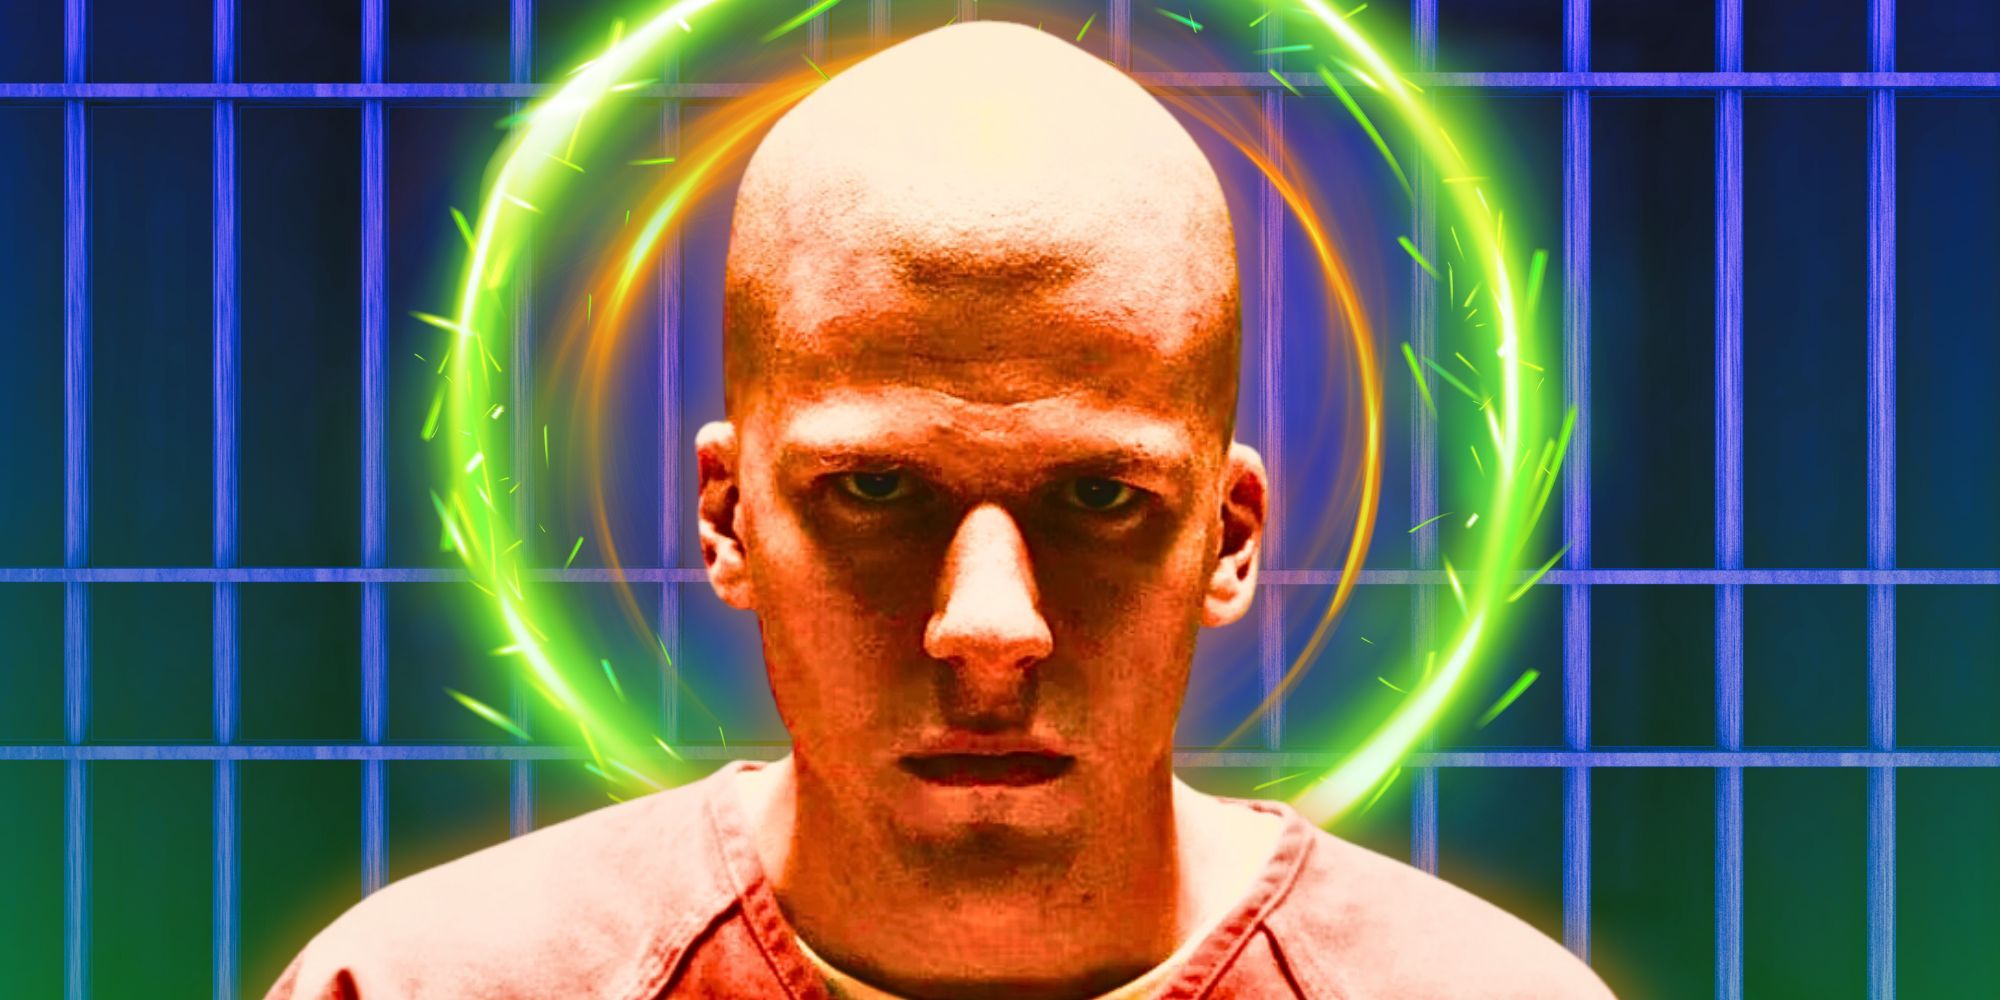 Jese Eisenberg looking serious as Lex Luthor with a halo in his background